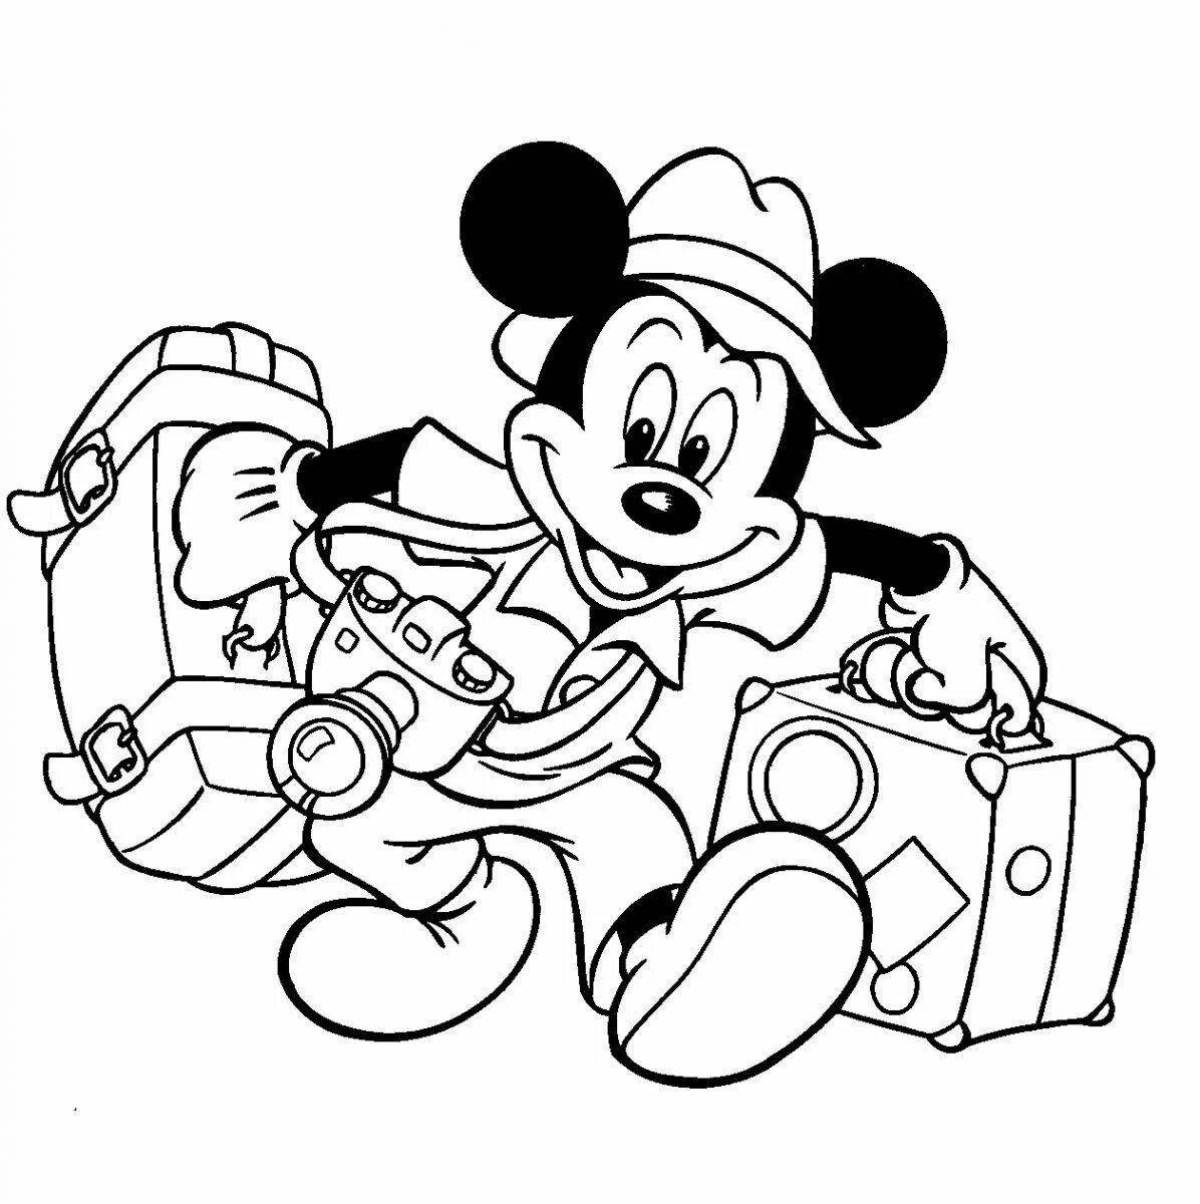 Mickey's colorful coloring games